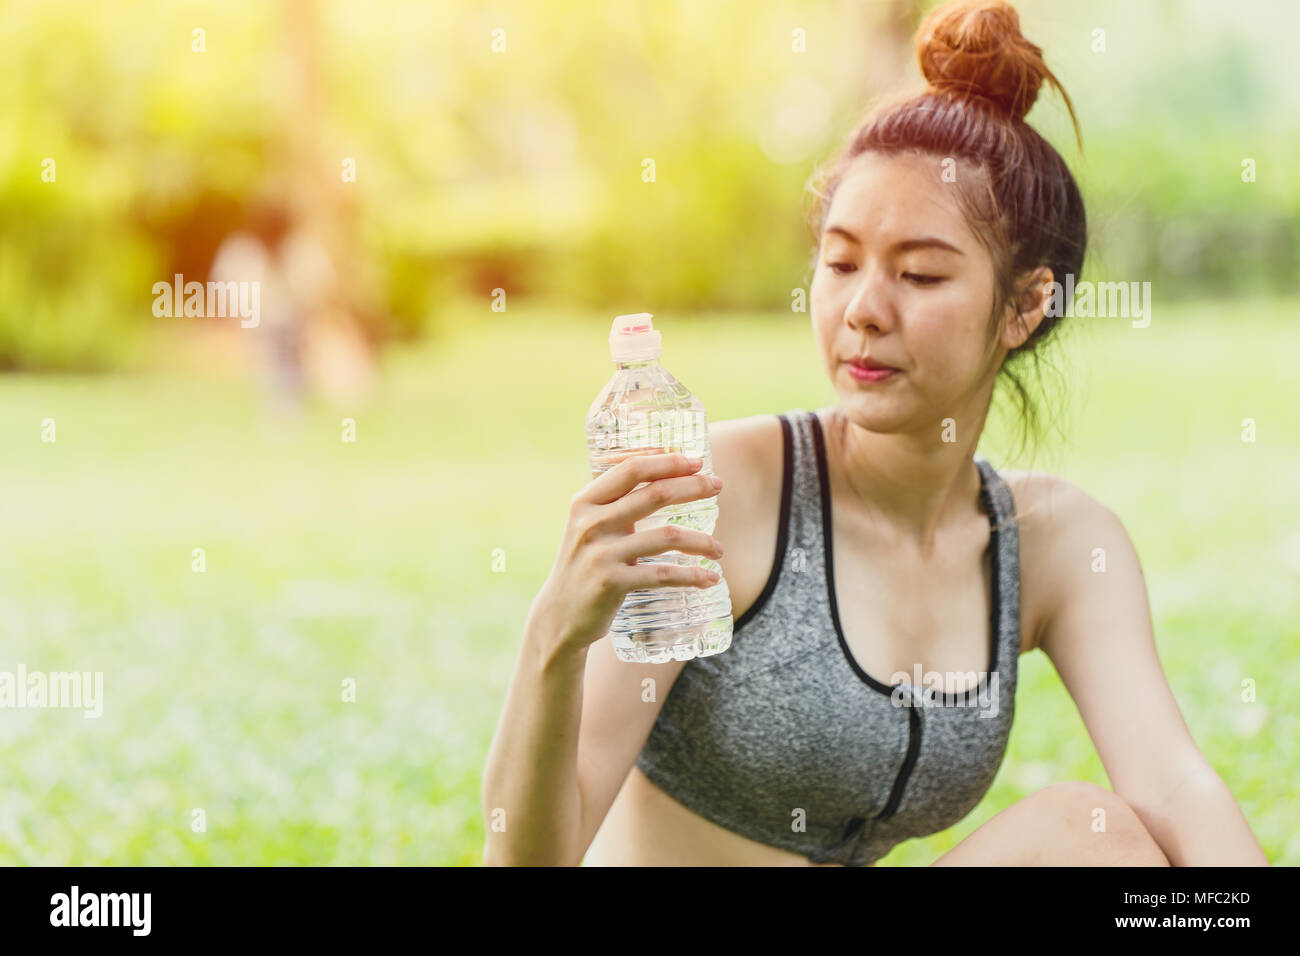 Asian sport teen look at drinking water bottle while outdoor activity selective focus at the drink water bottle Stock Photo